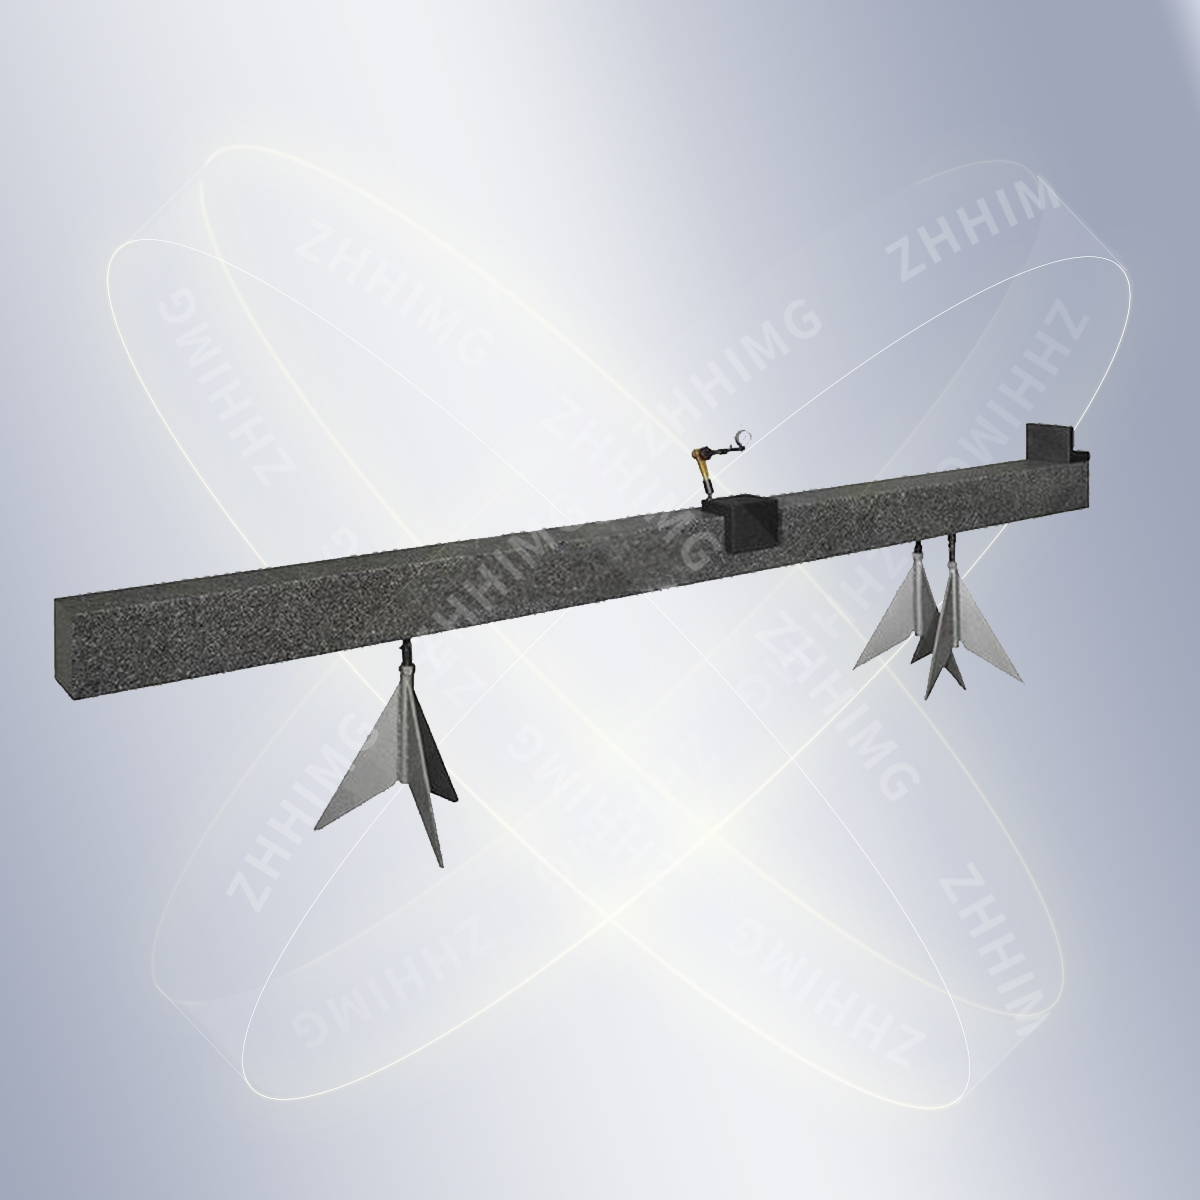 Well-designed Automated Optical Inspection Granite Precision - Granite Straight Ruler With Grade 00 (Grade AA) Of DIN, JJS, ASME Or GB Standard – ZHONGHUI